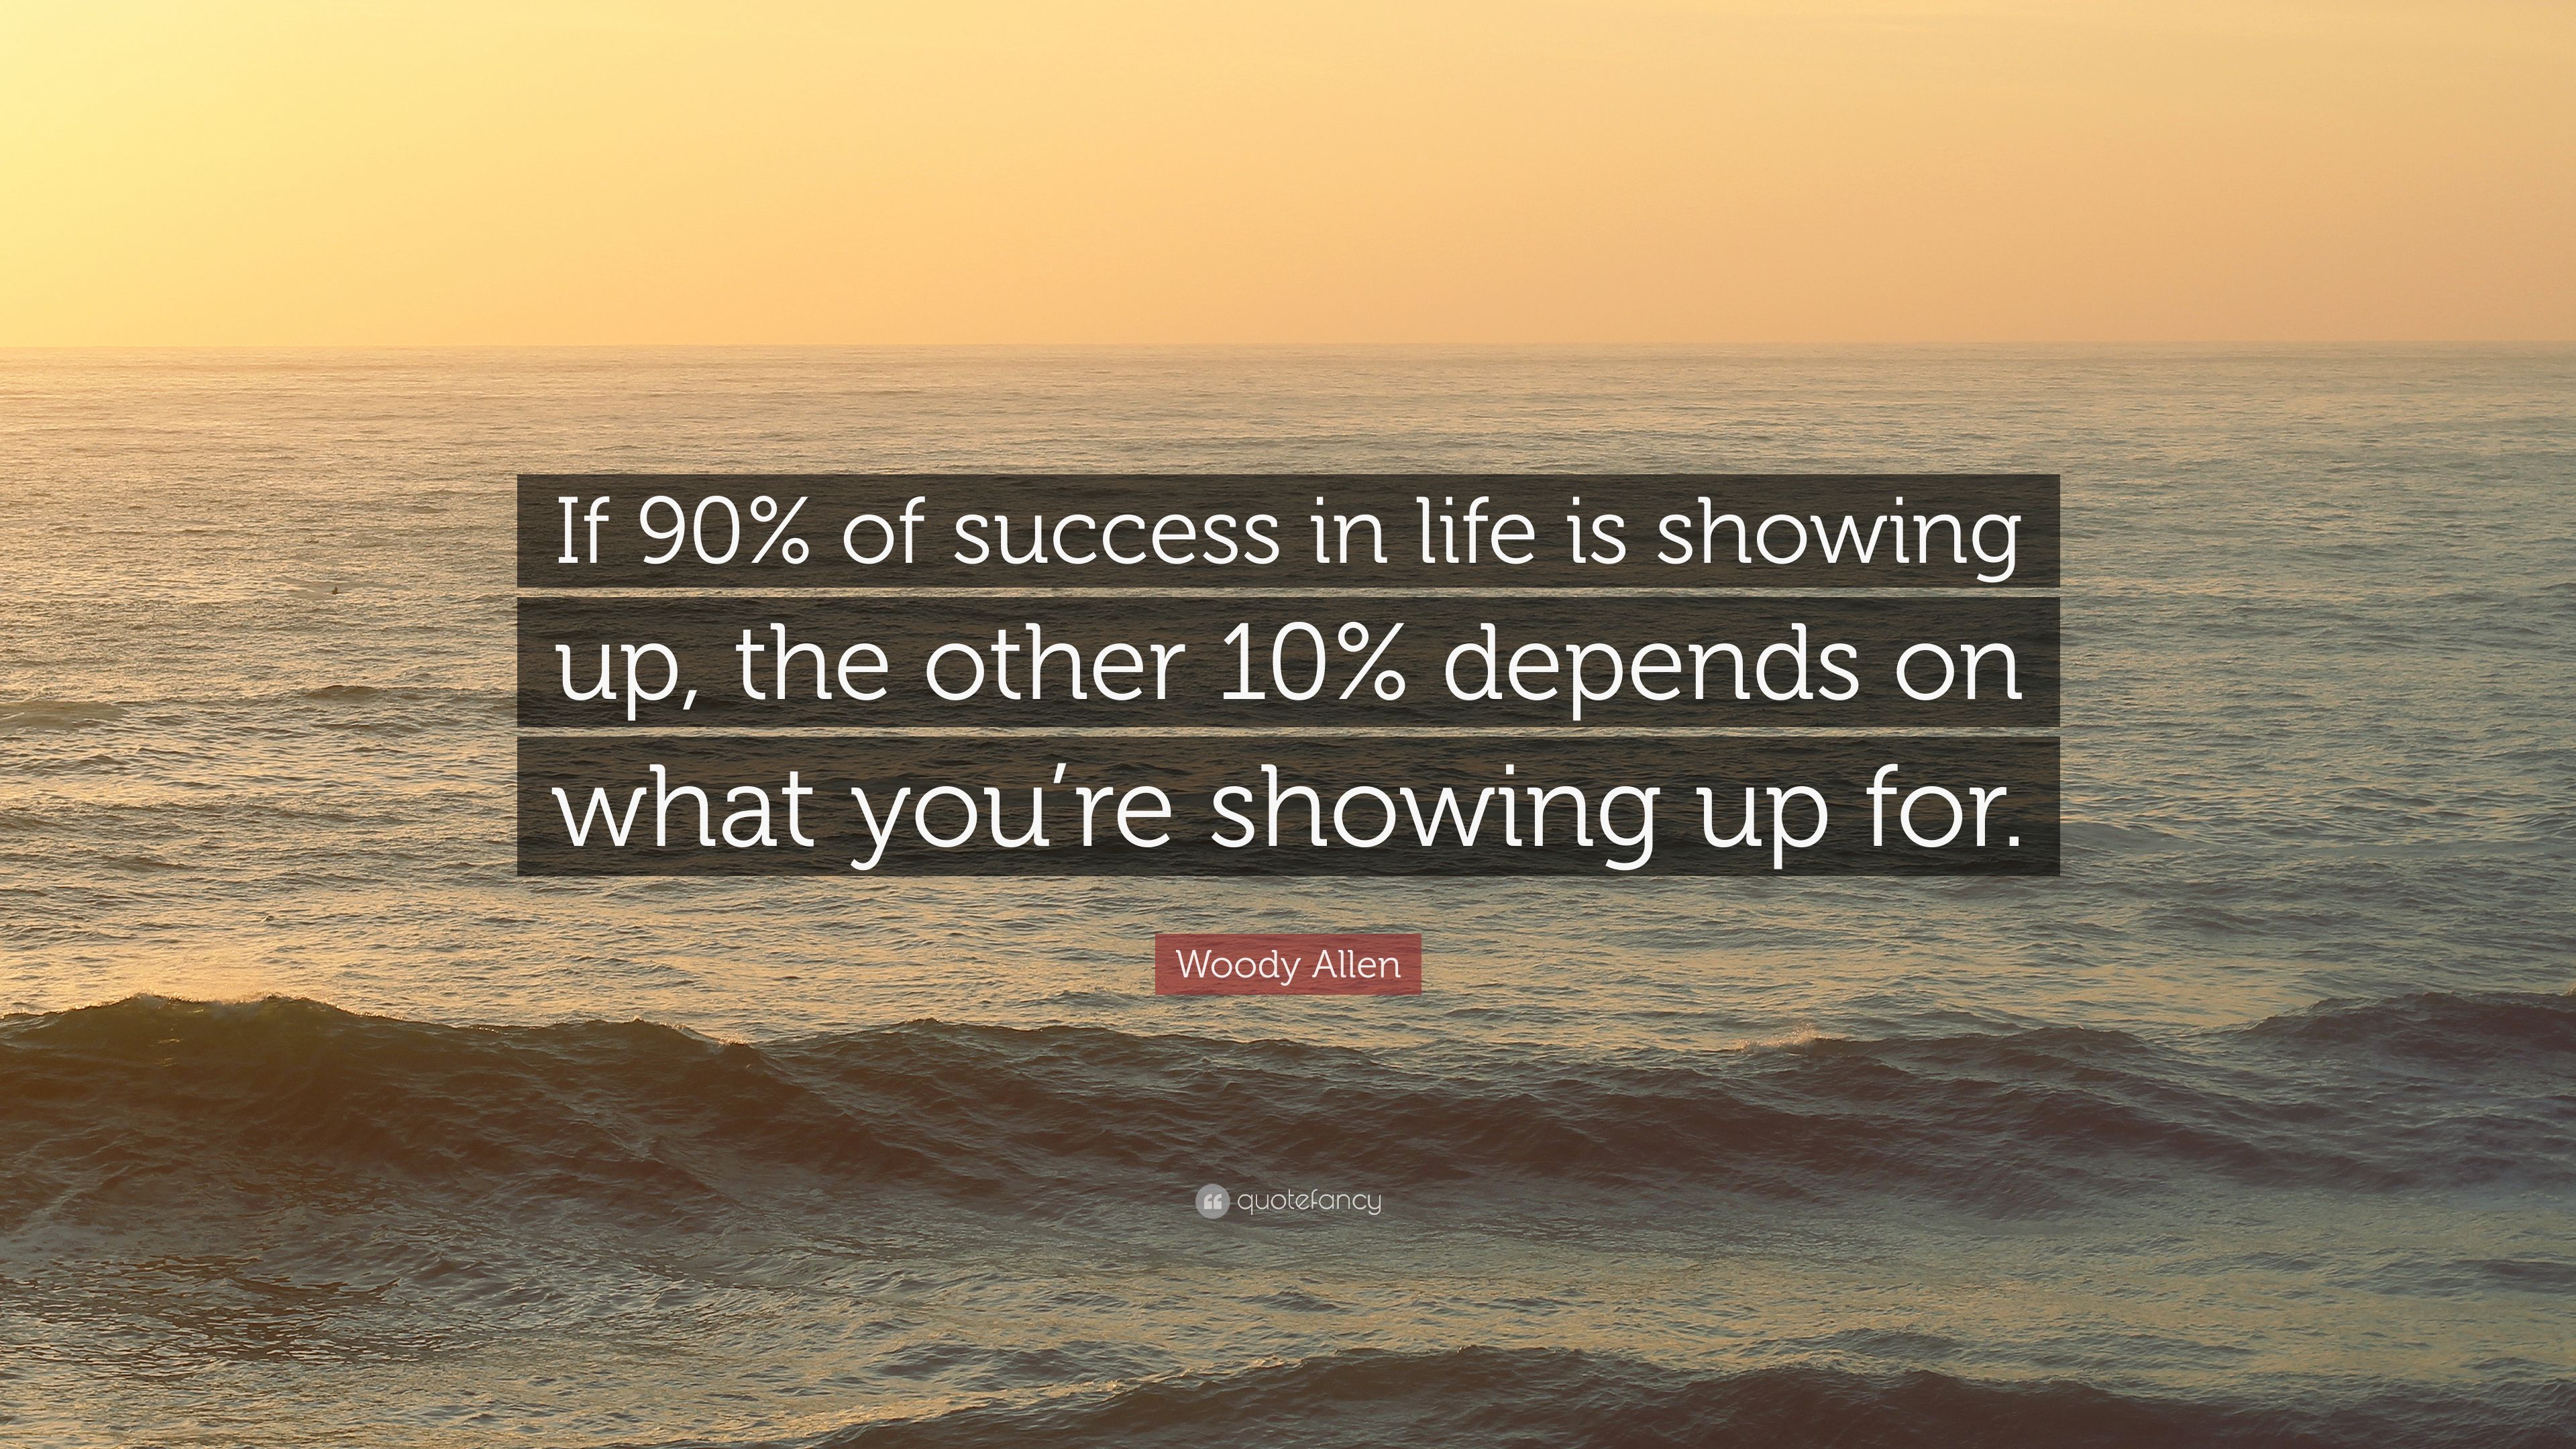 Woody Allen Quote: "If 90% of success in life is showing up, the other...